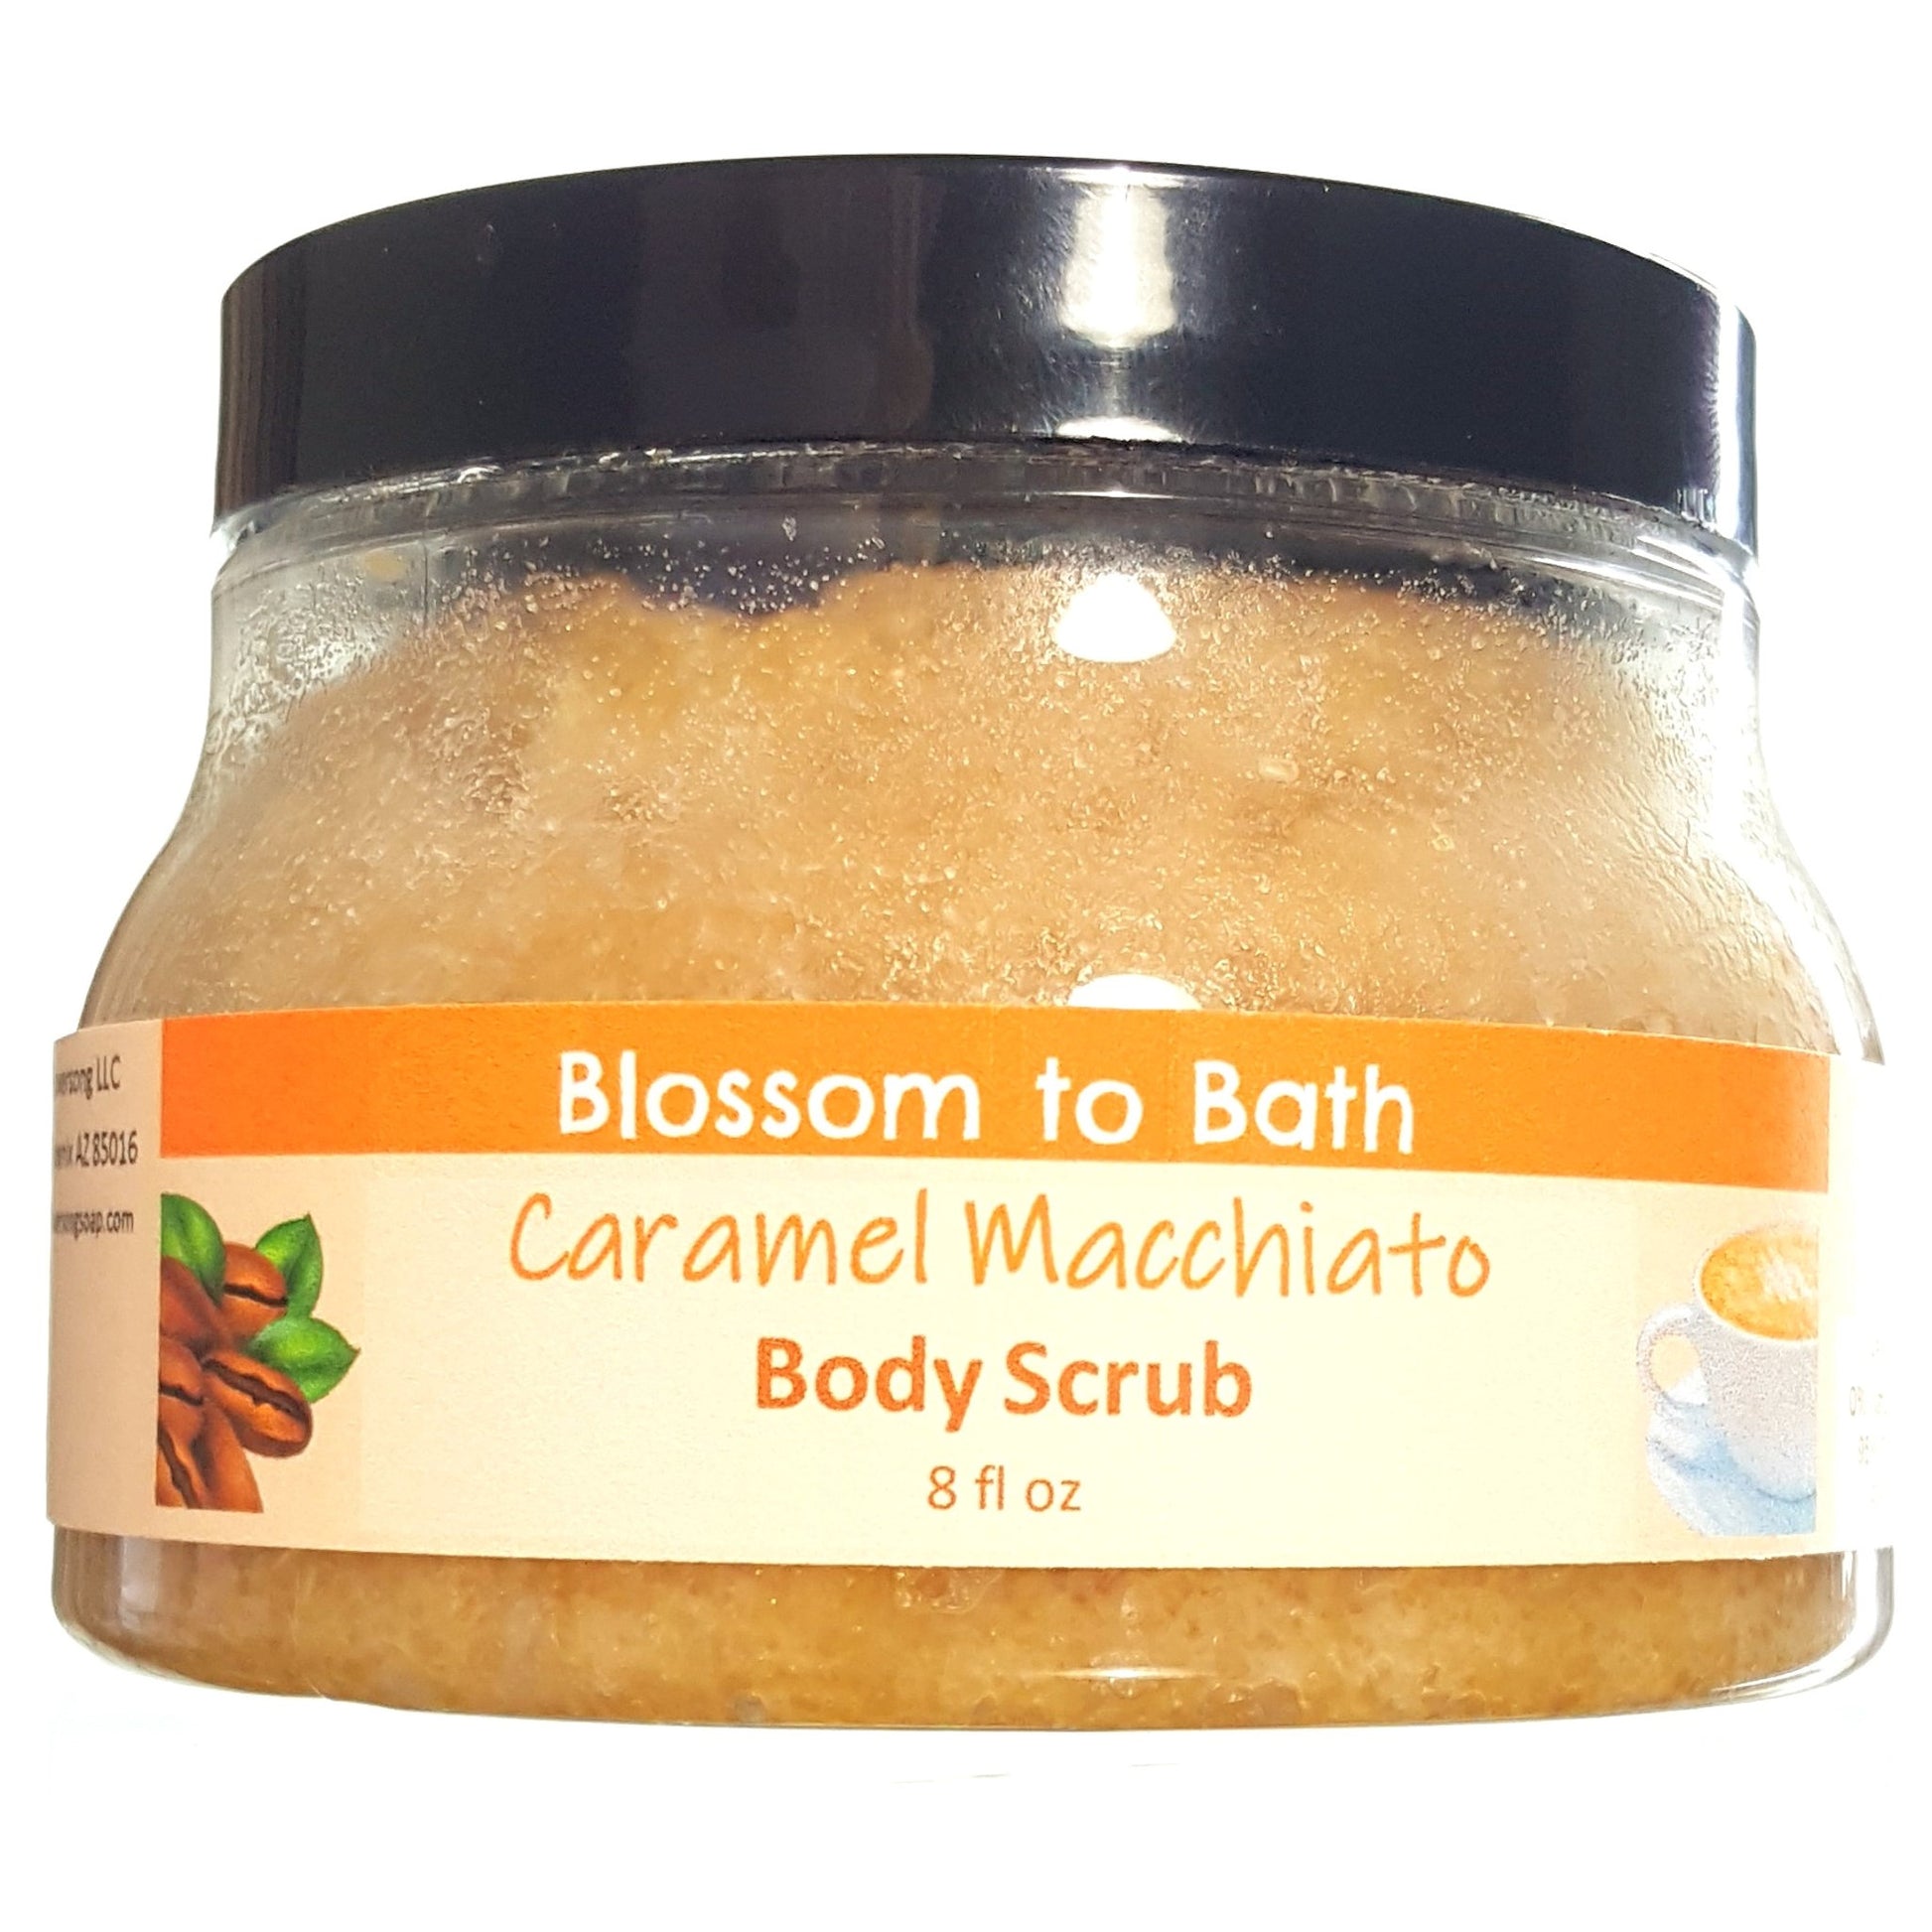 Buy Blossom to Bath Caramel Macchiato Body Scrub from Flowersong Soap Studio.  Large crystal turbinado sugar plus  rich oils conveniently exfoliate and moisturize in one step  Luscious vanilla and warm rich caramel - a gourmet coffee experience with sweet caramel in a bed of vibrant coffee;